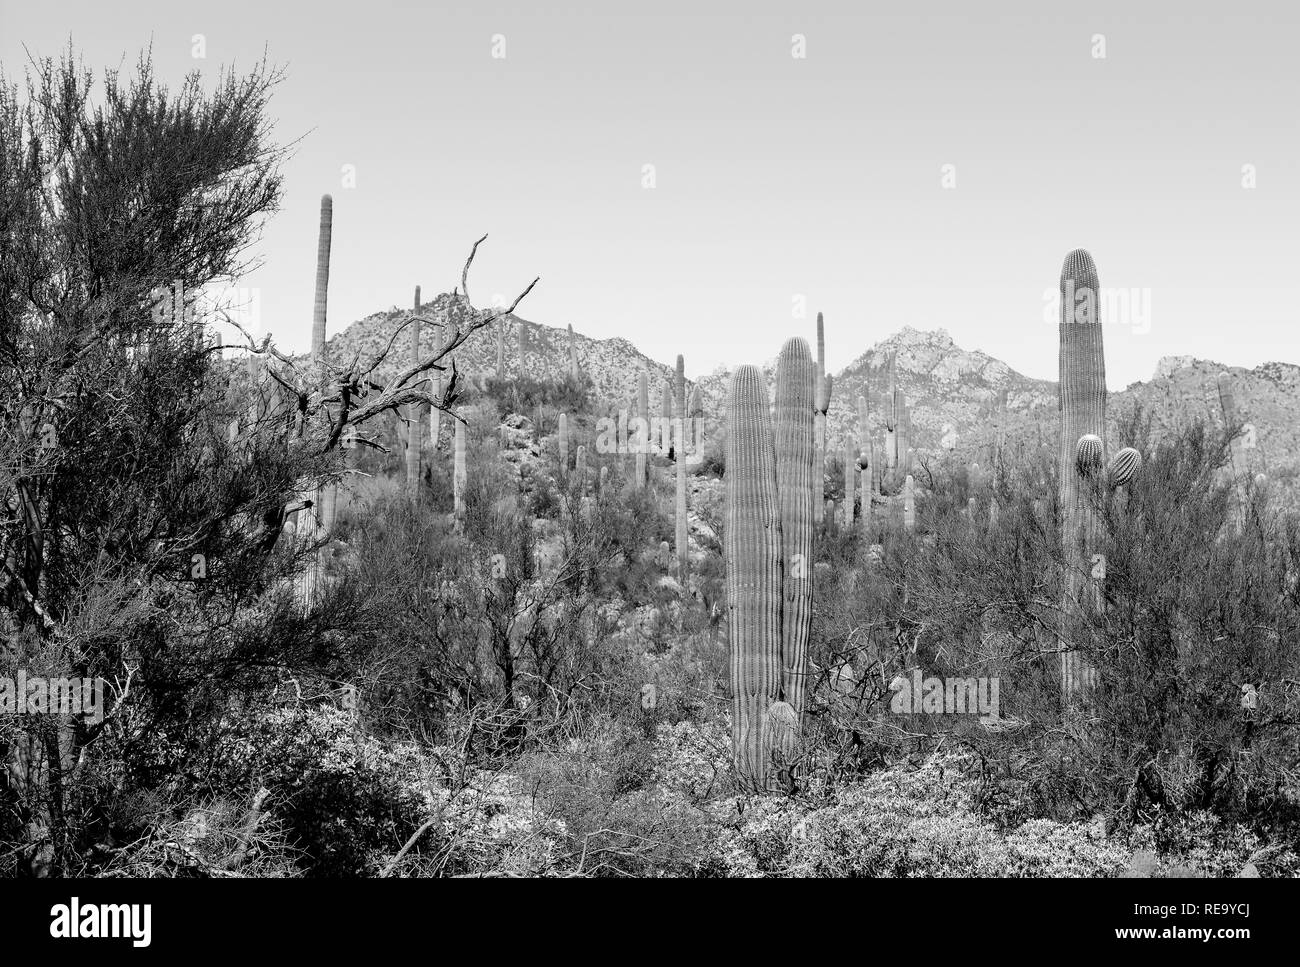 The saguaro cacti cover the area of the Sabino Canyon recreation Area located in the Santa Catalina Mountains near Tucson, AZ in black and white Stock Photo